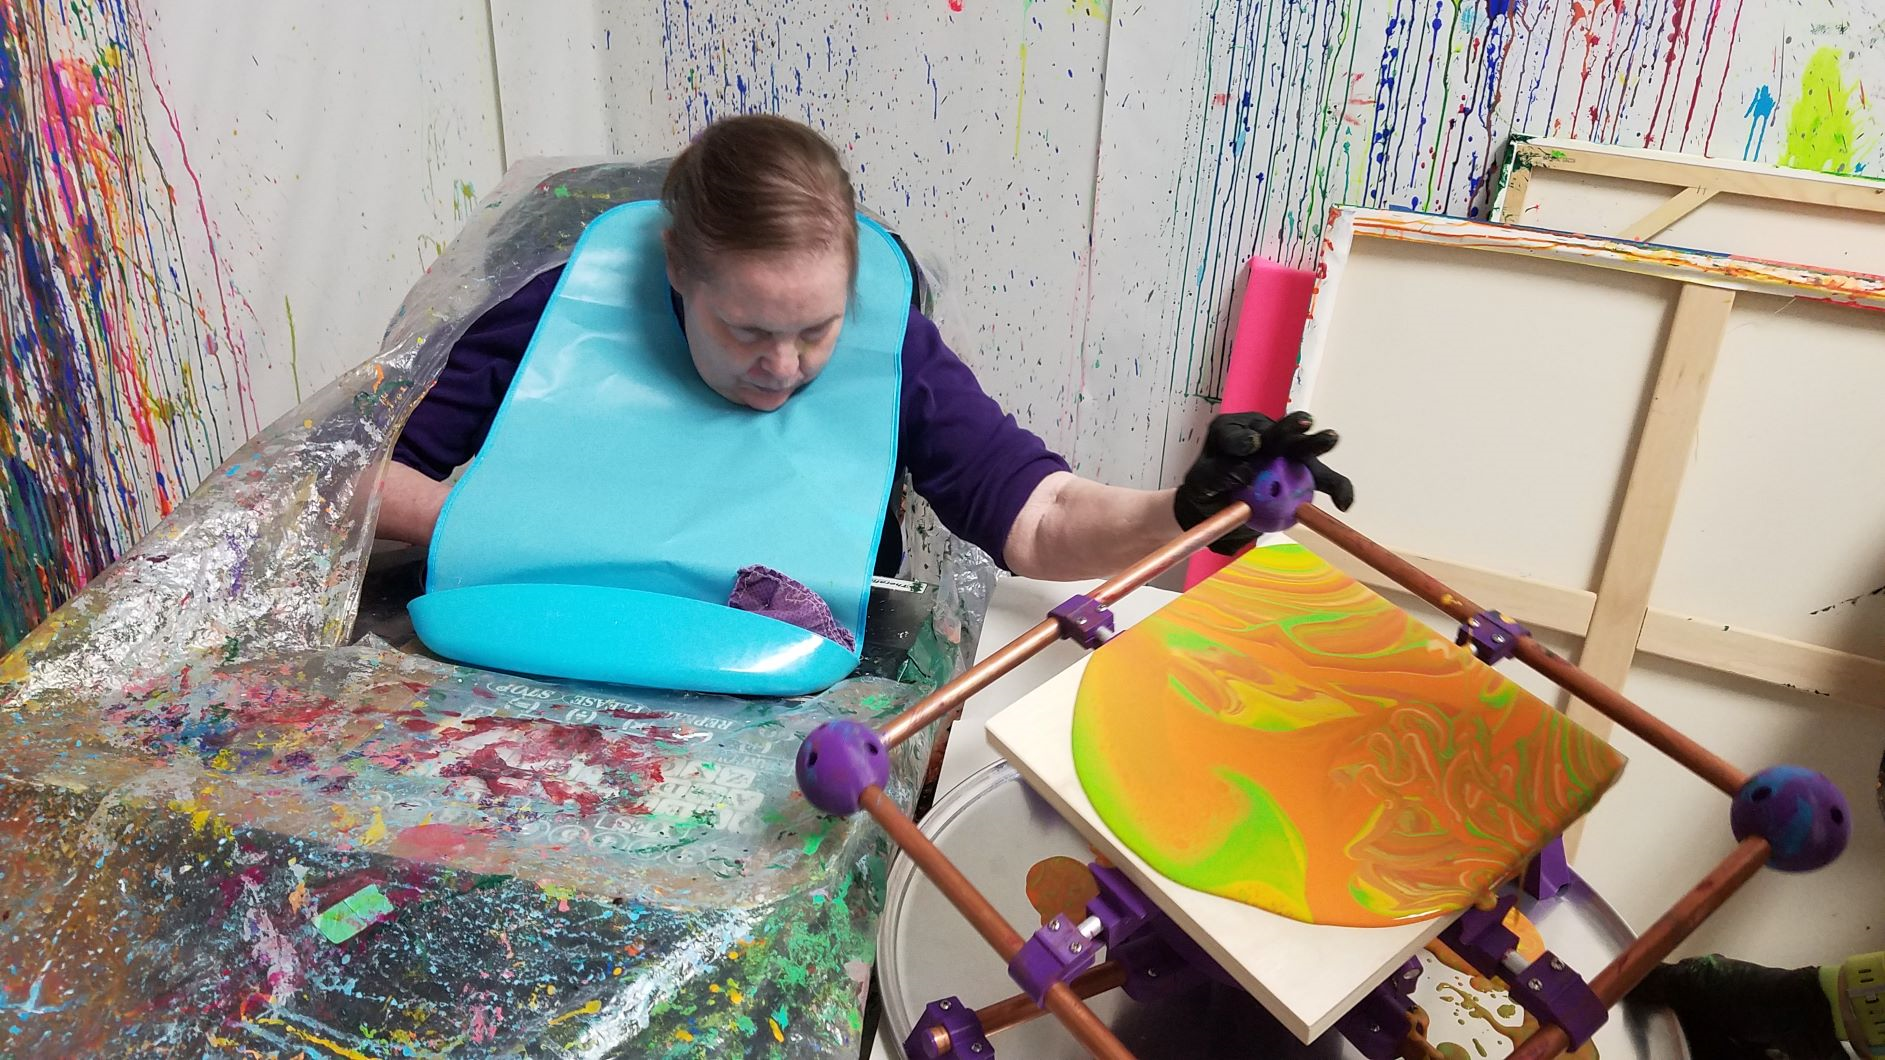 Artists With Disabilities Helped By Madison Man’s Technology Creations